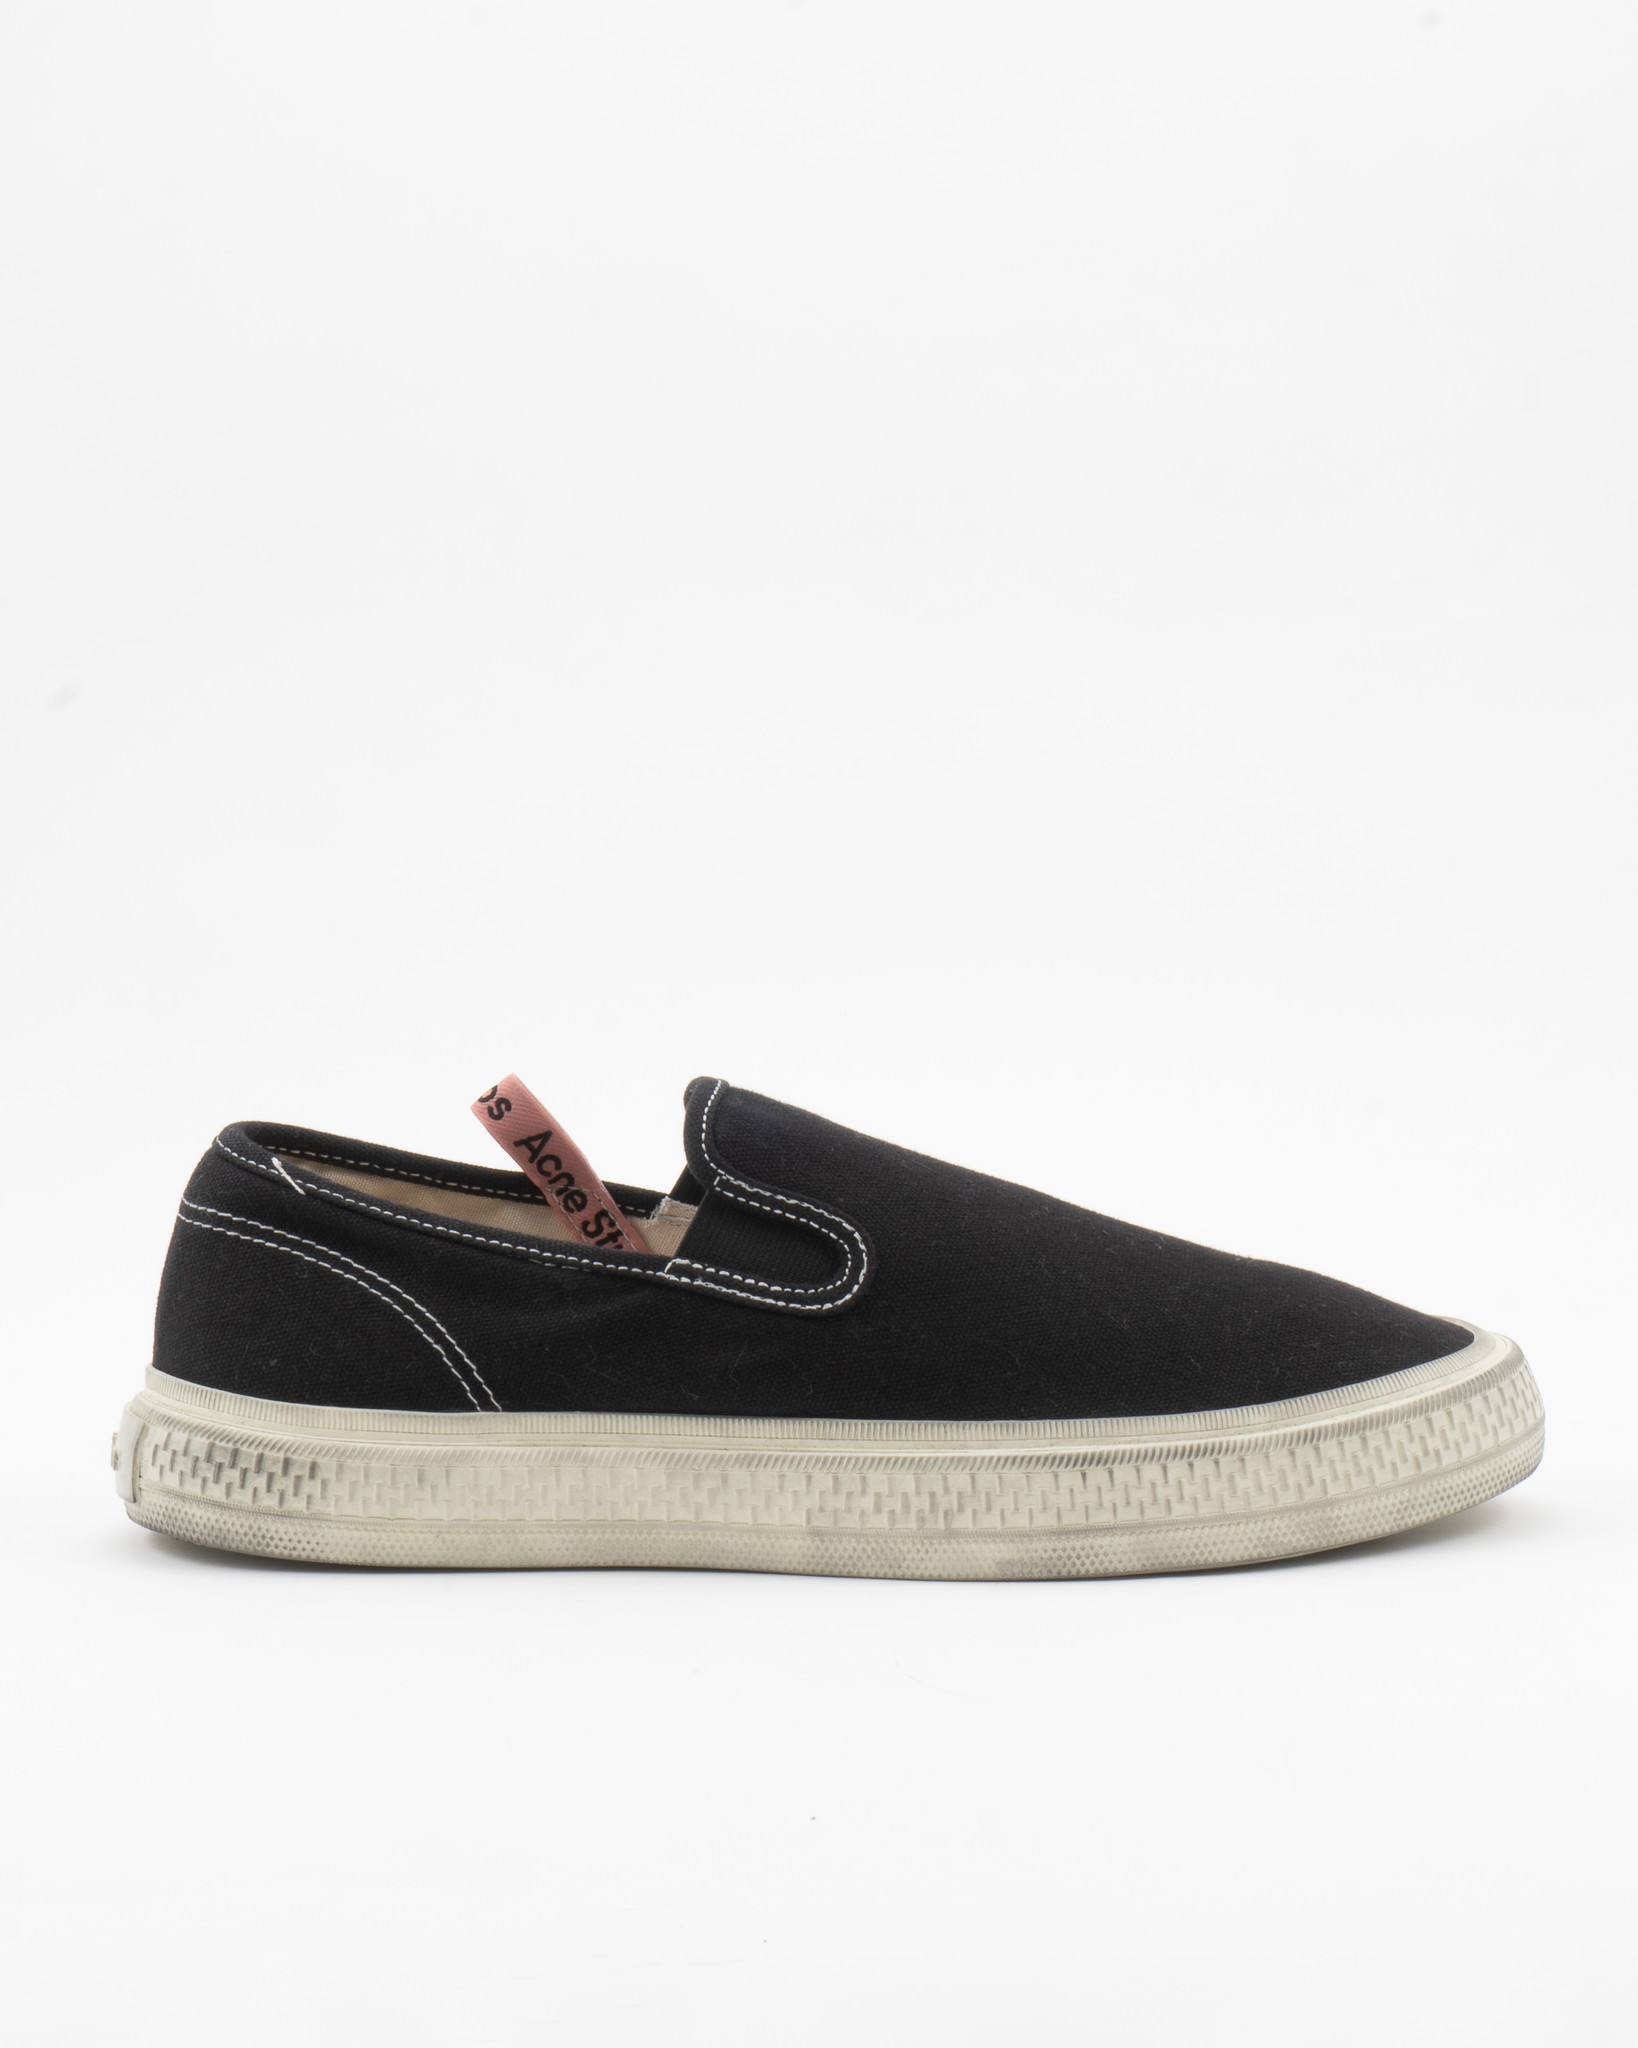 Chaussures Slip-On Noires et Blanches